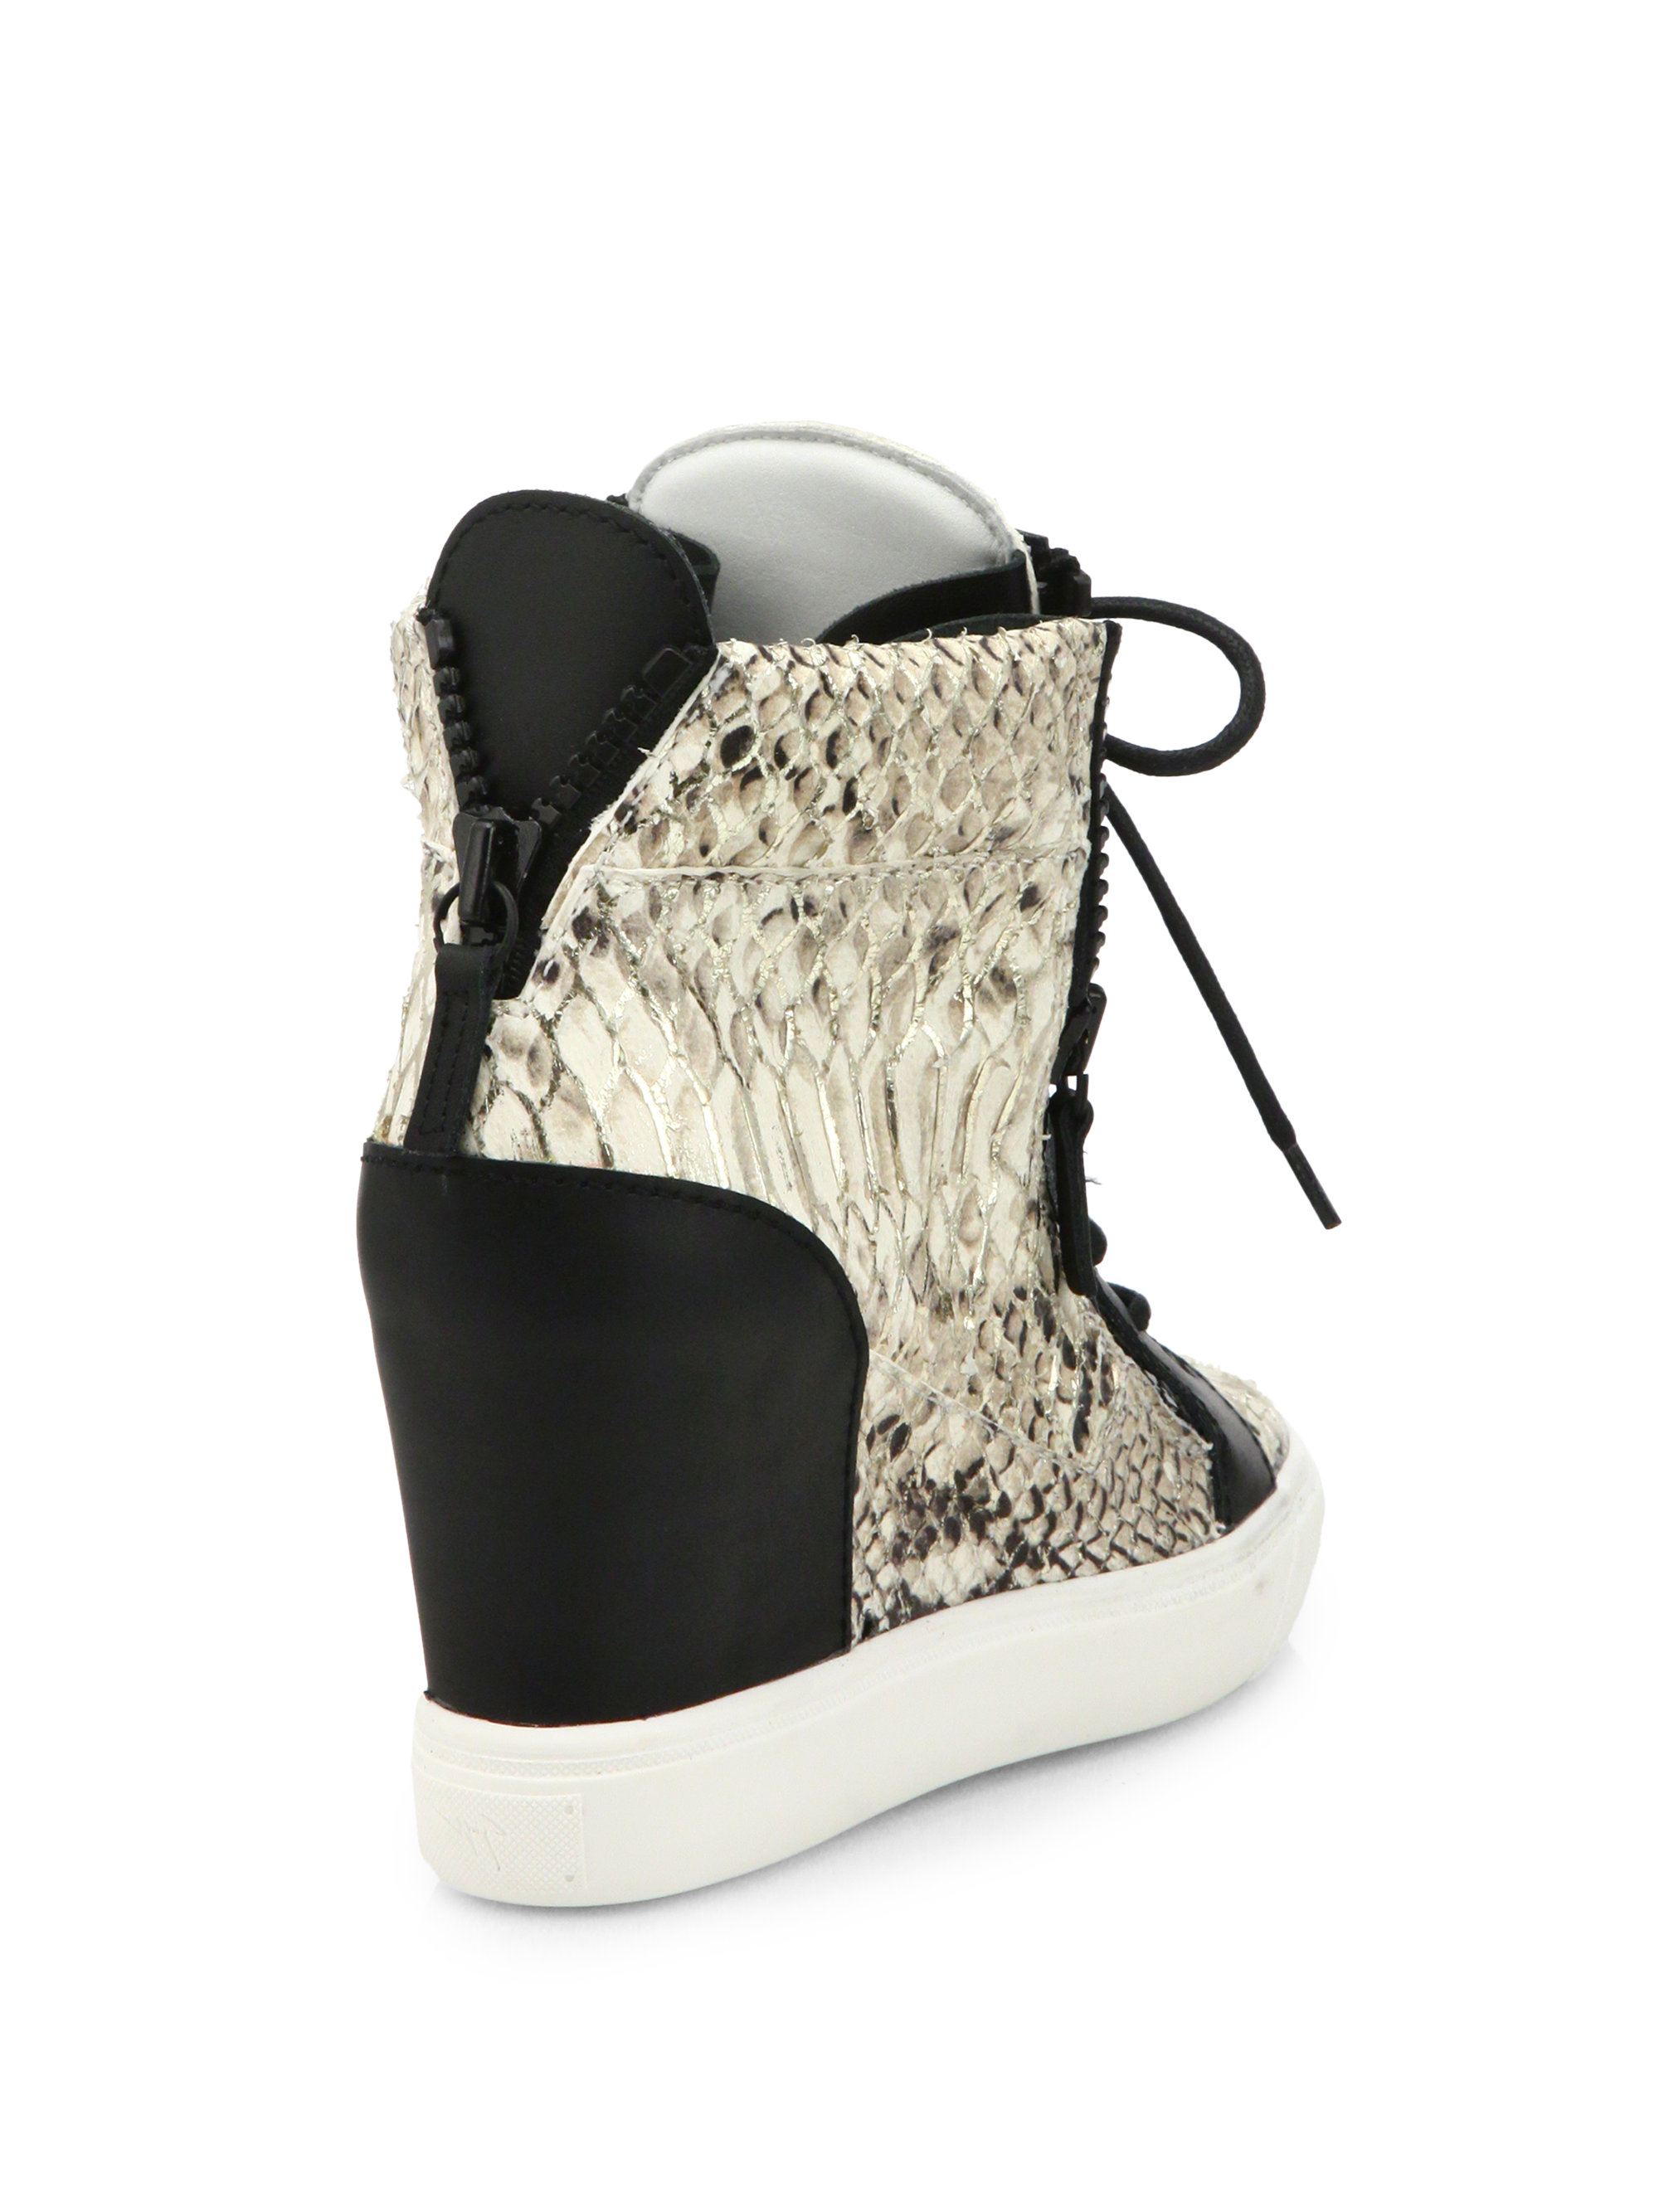 Giuseppe Zanotti Python & Leather Wedge Sneakers in Black | Lyst